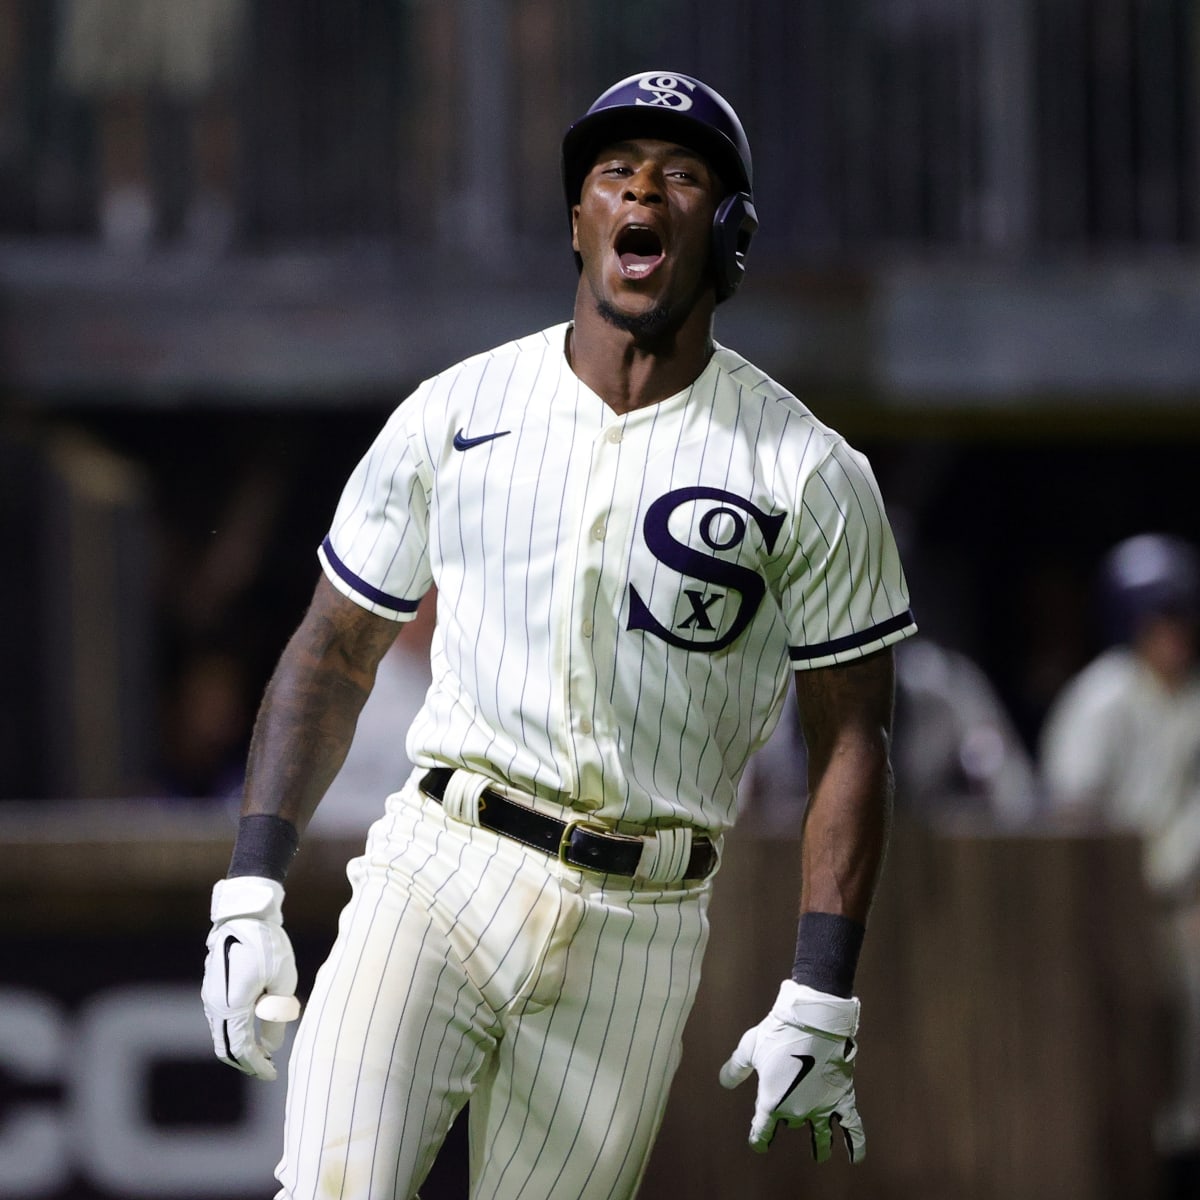 WATCH: Tim Anderson drives in insurance run, White Sox lead 5-2